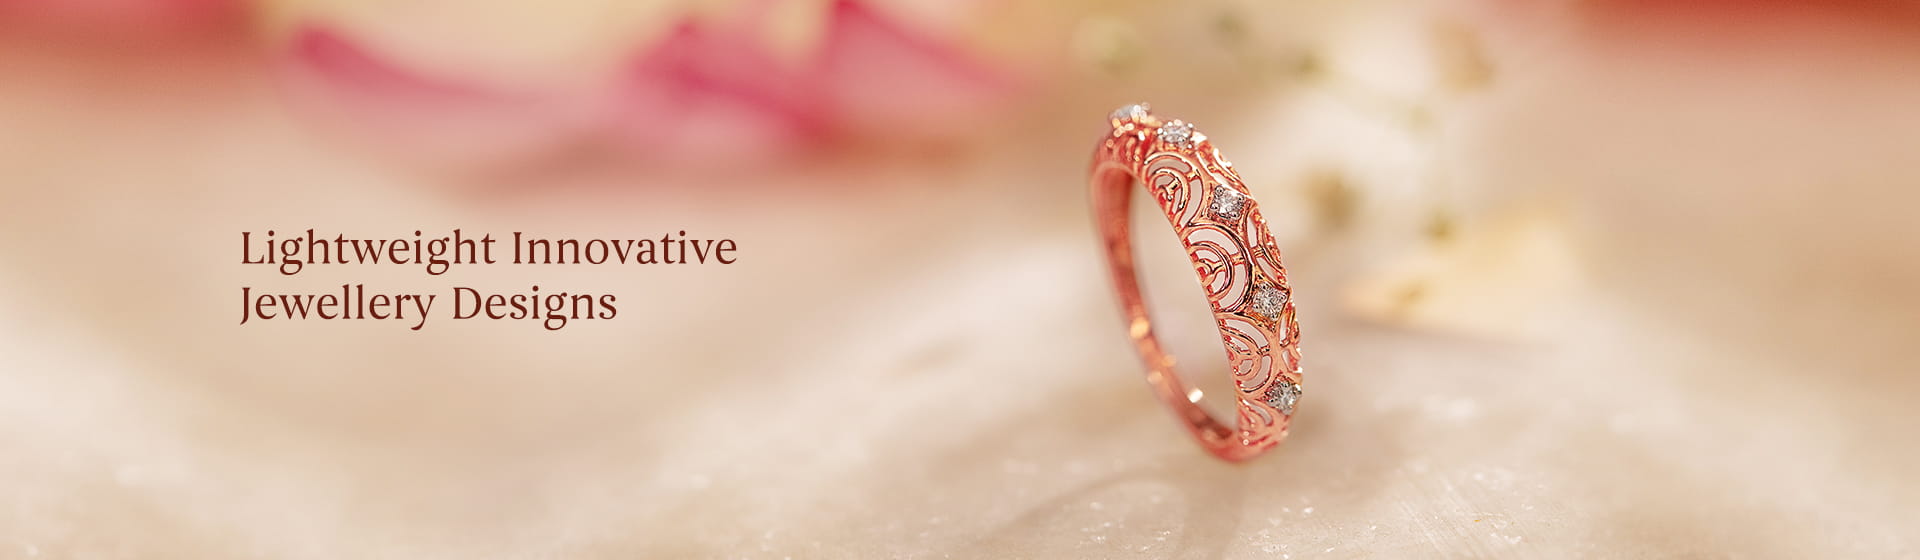 At CaratLane, all latest gold and diamond designs of jewellery are affordable and lightweight